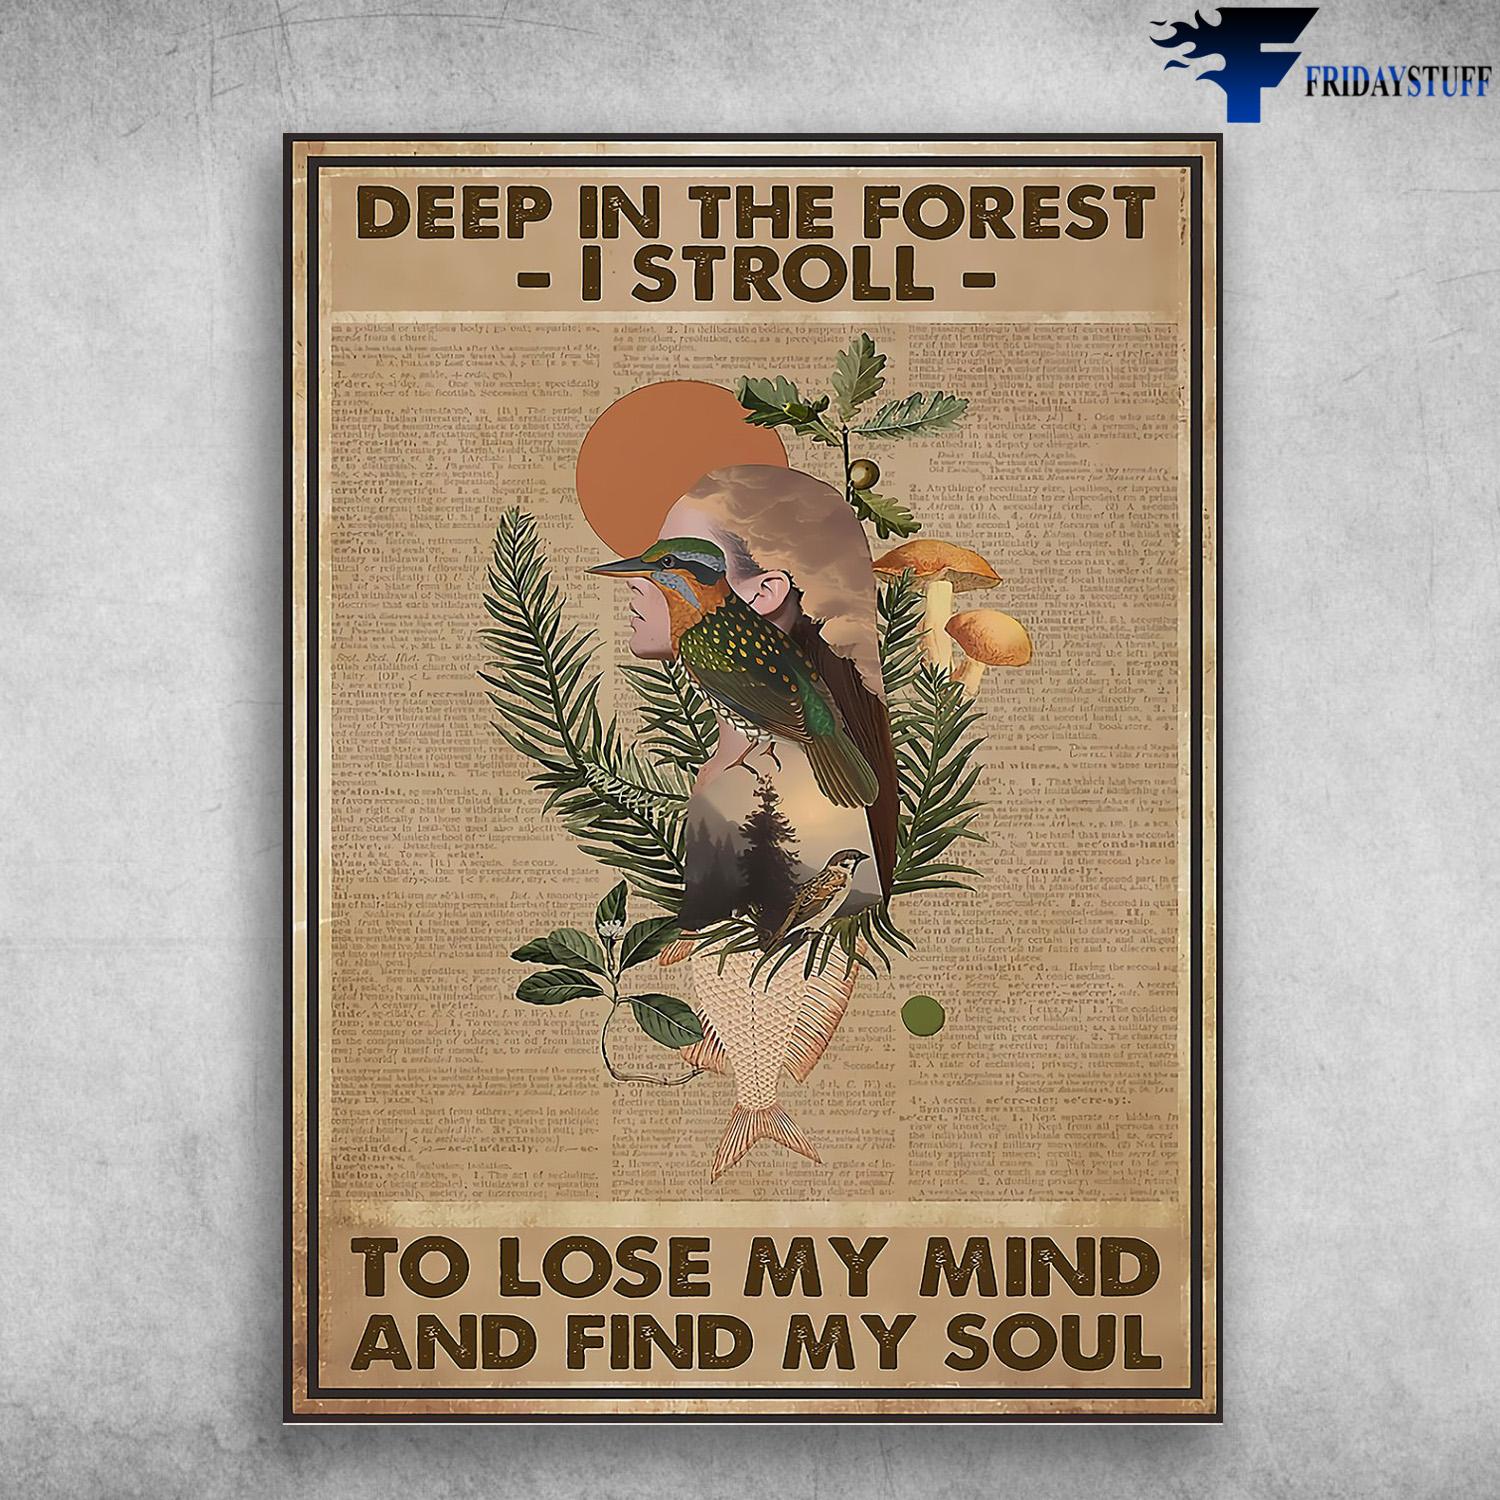 Girl In The Forest - Deep In The Forest, I Stroll, To Lose My Mind, And Find My Soul